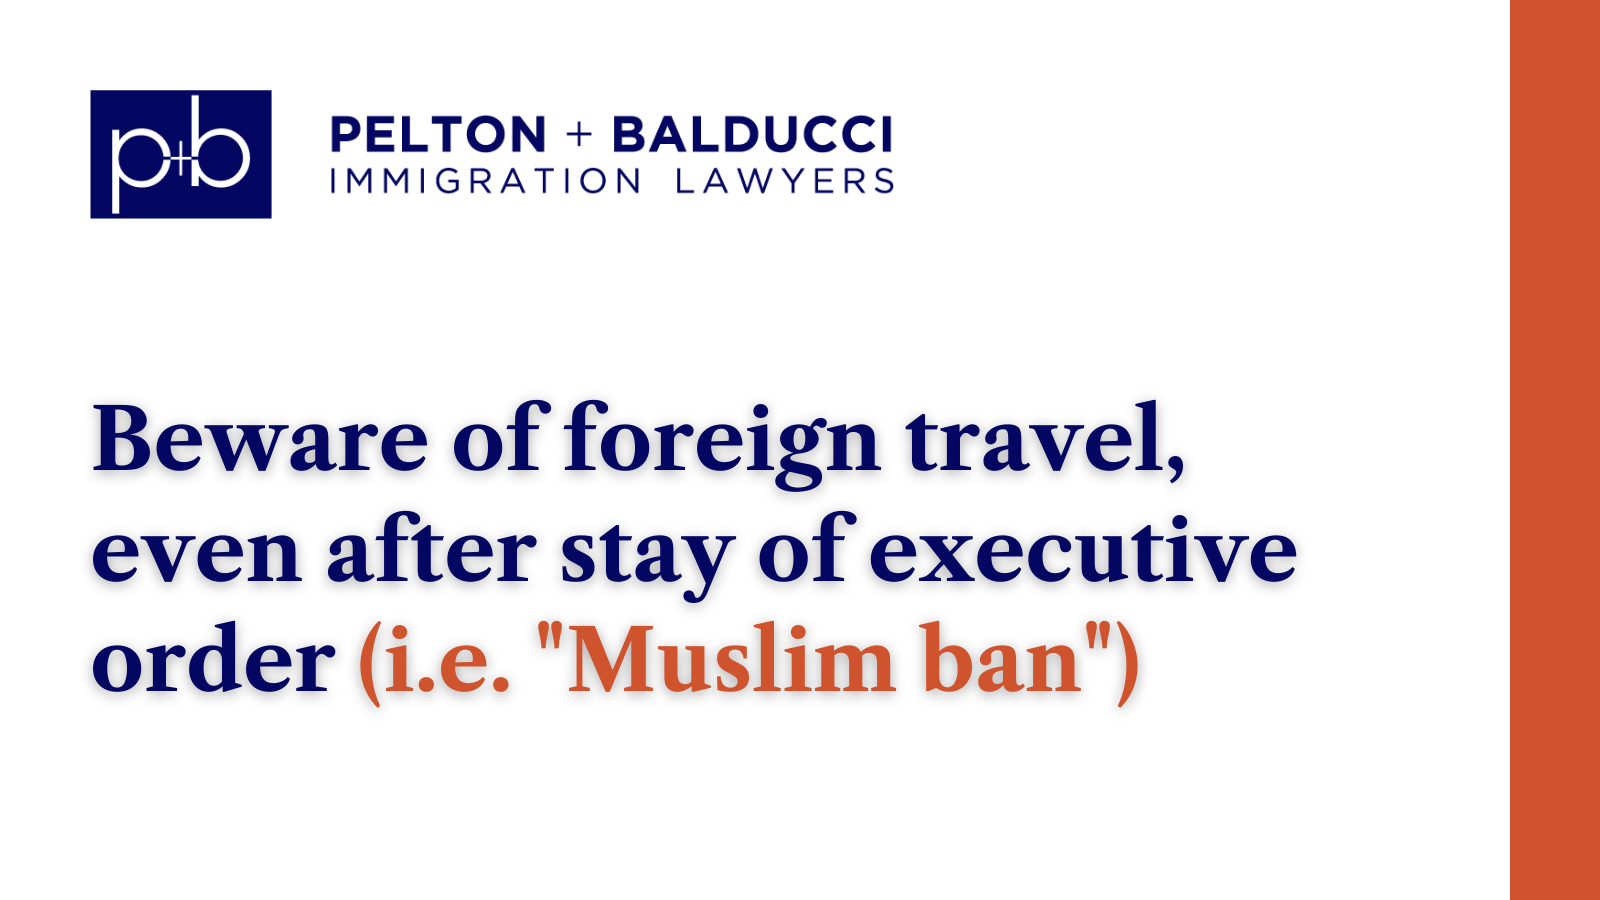 Beware of foreign travel, even after stay of executive order (i.e. "Muslim ban") - New Orleans Immigration Lawyers - Pelton Balducci